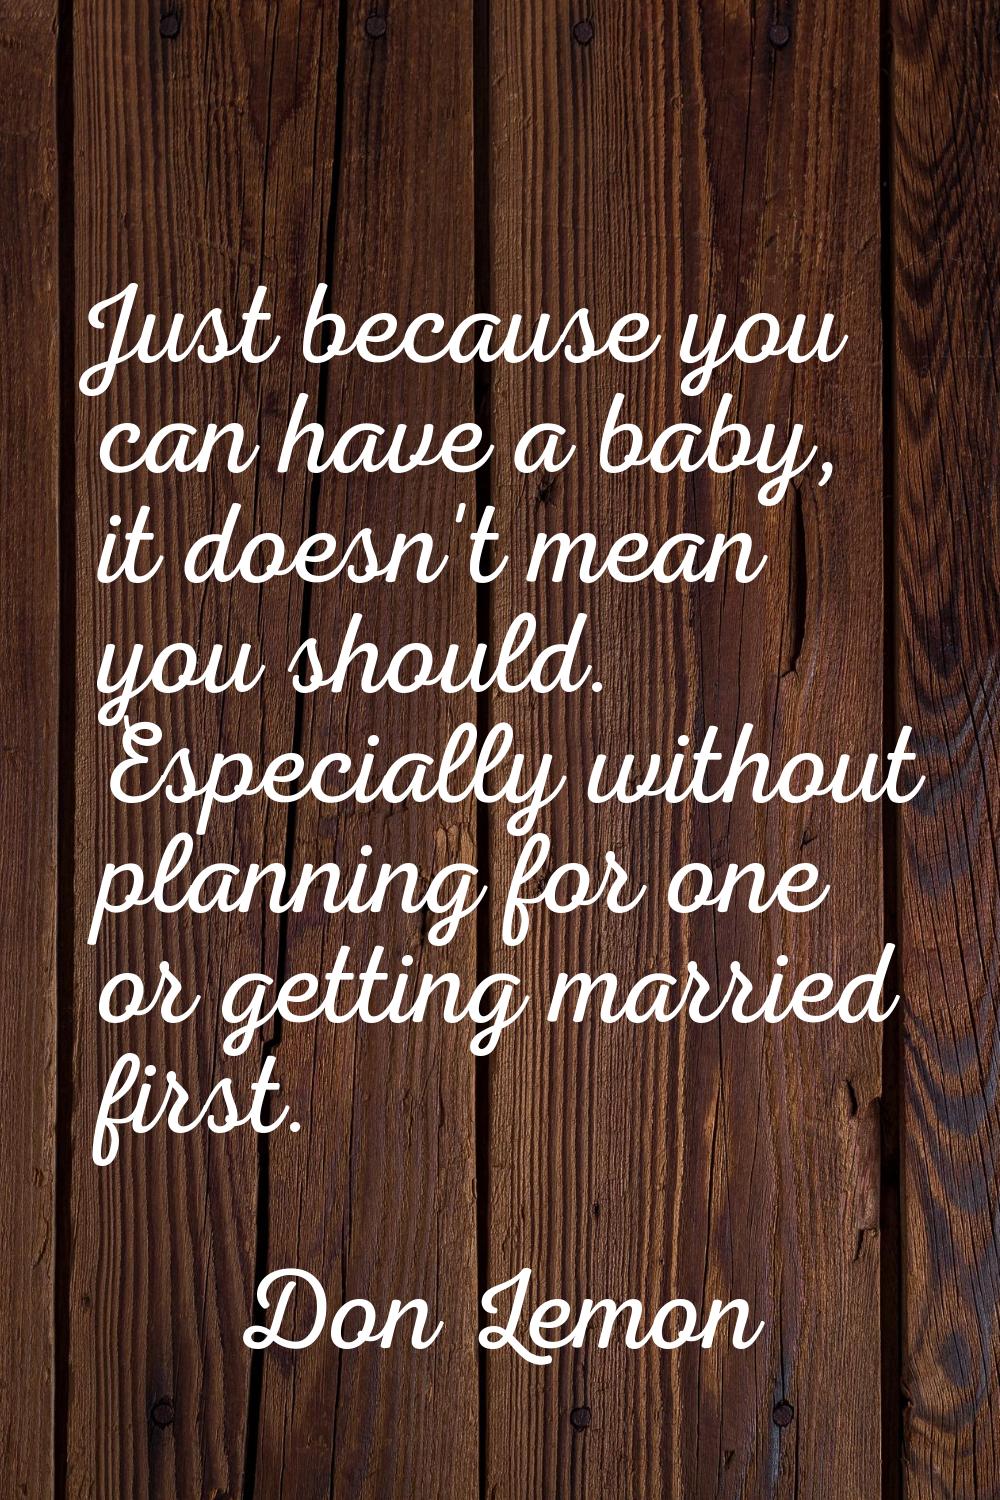 Just because you can have a baby, it doesn't mean you should. Especially without planning for one o